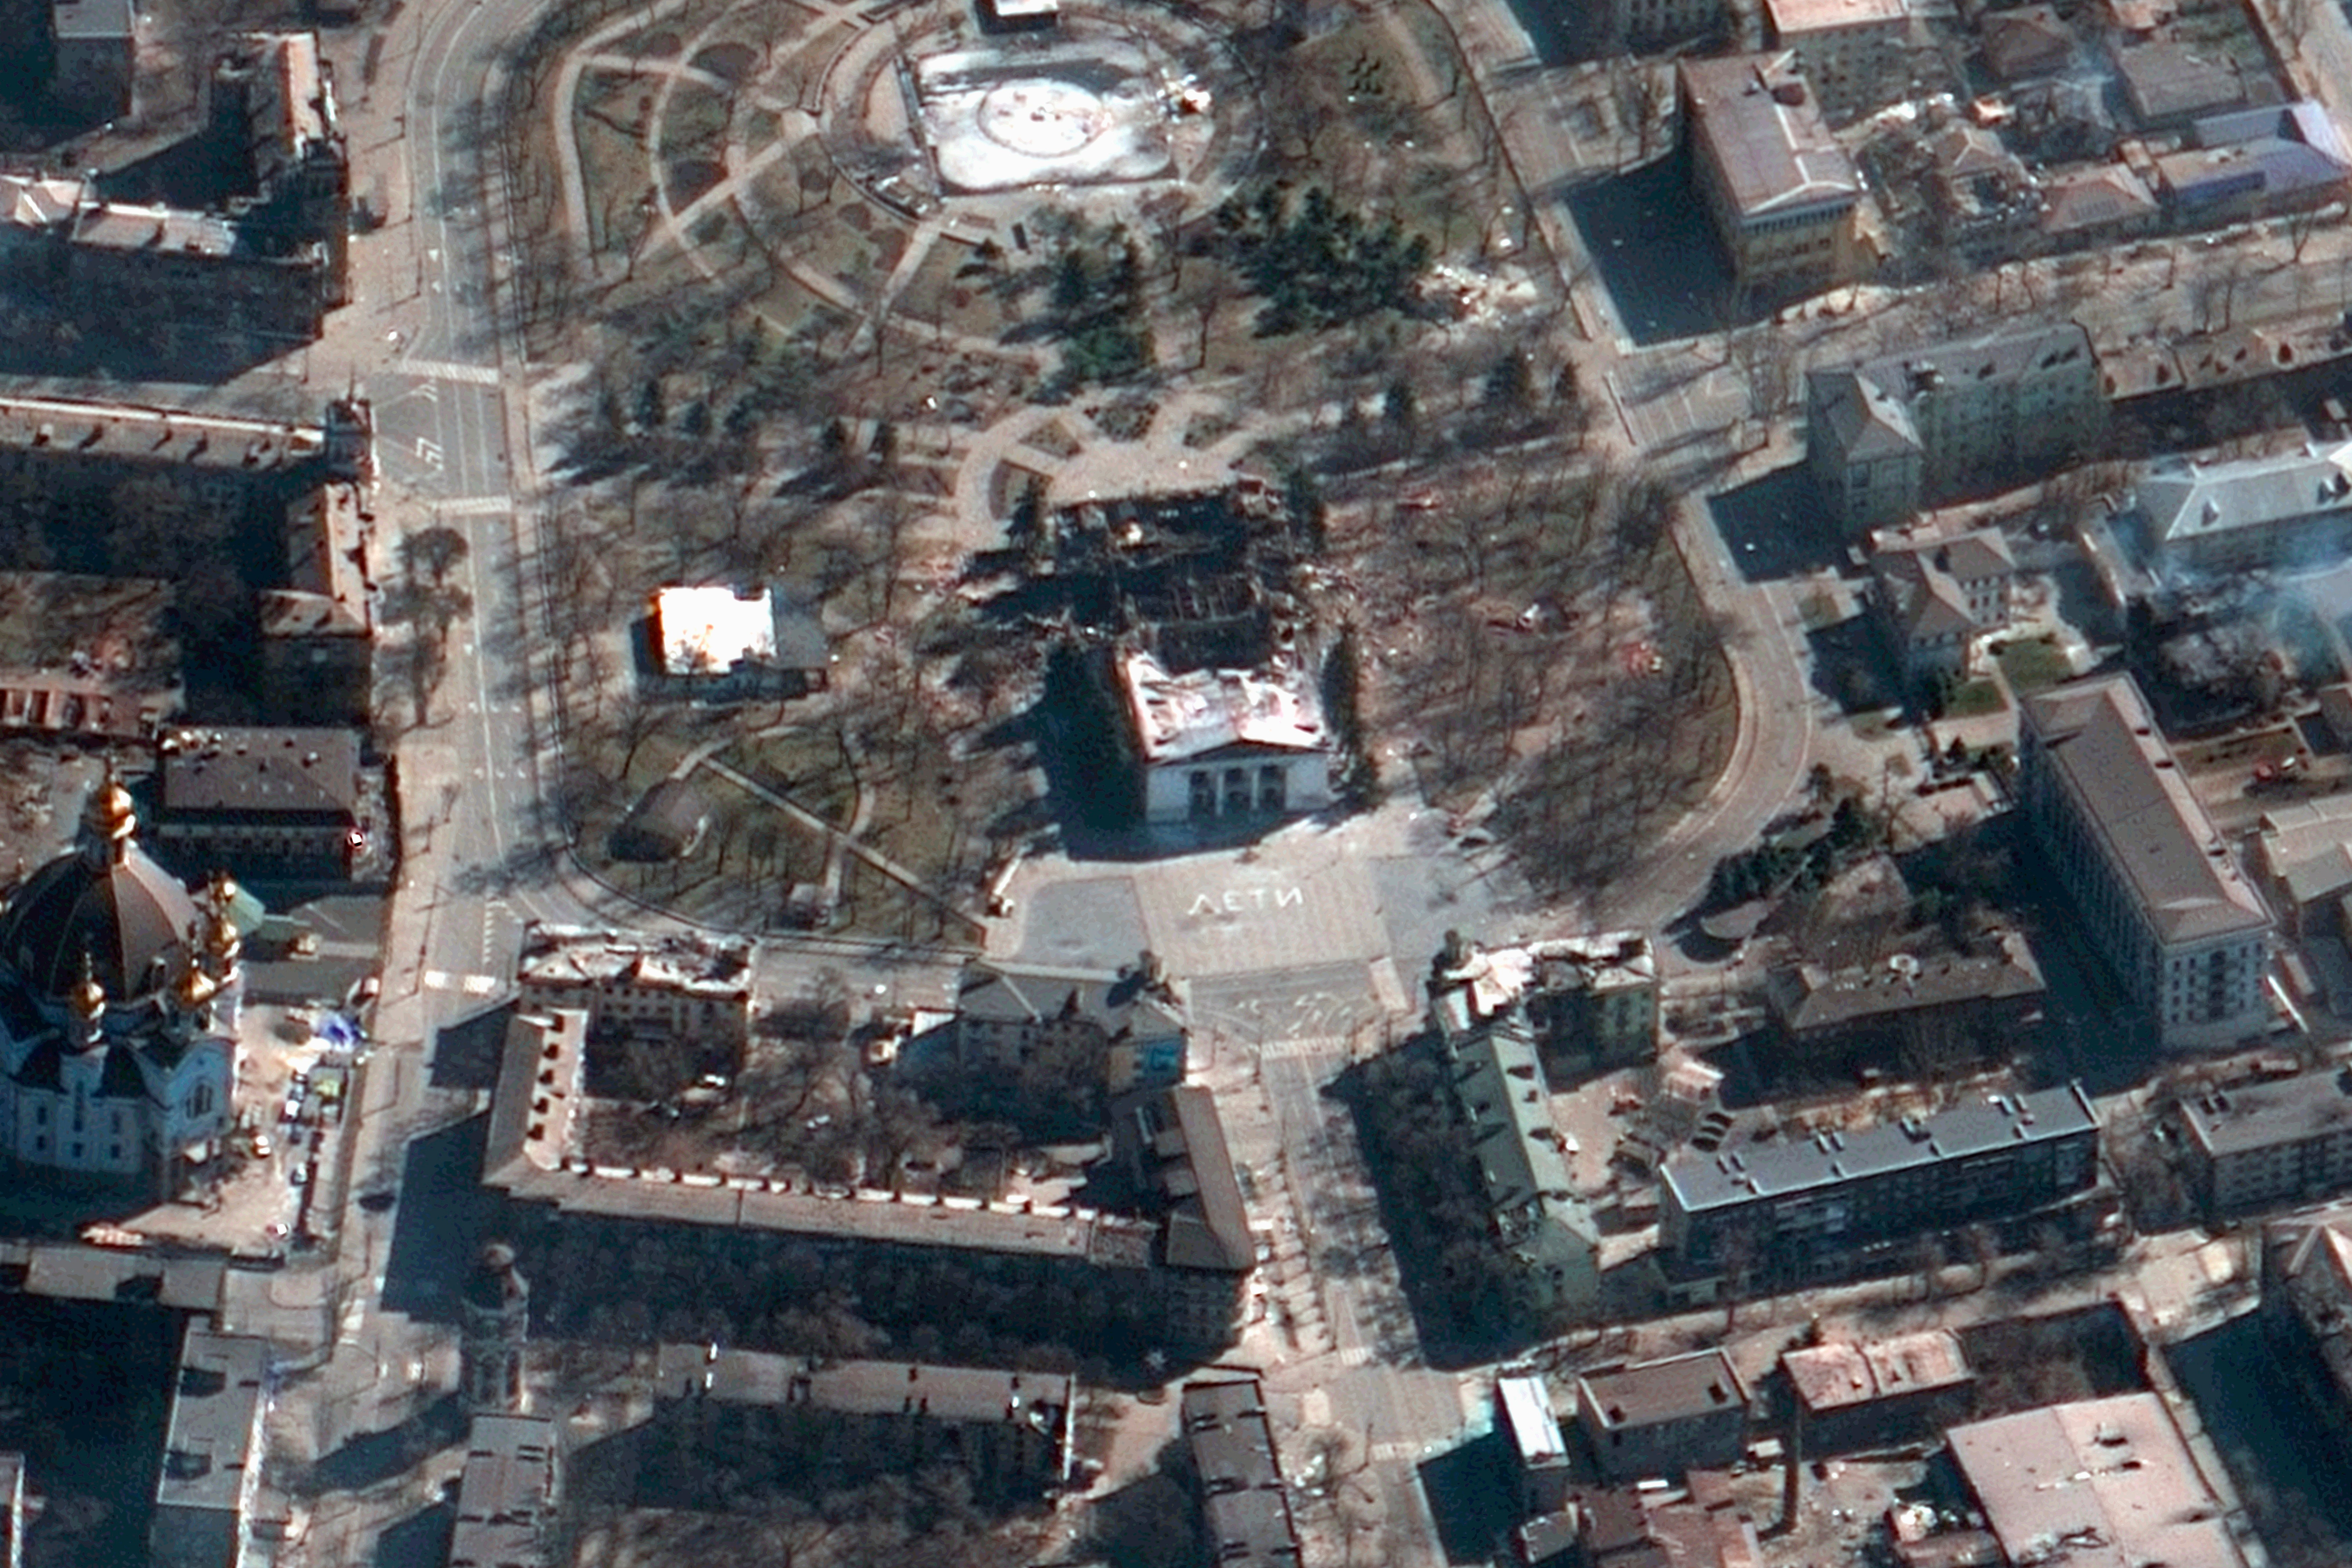 Satellite imaging showing the aftermath of the bombing of the Drama Theatre in Mariupol